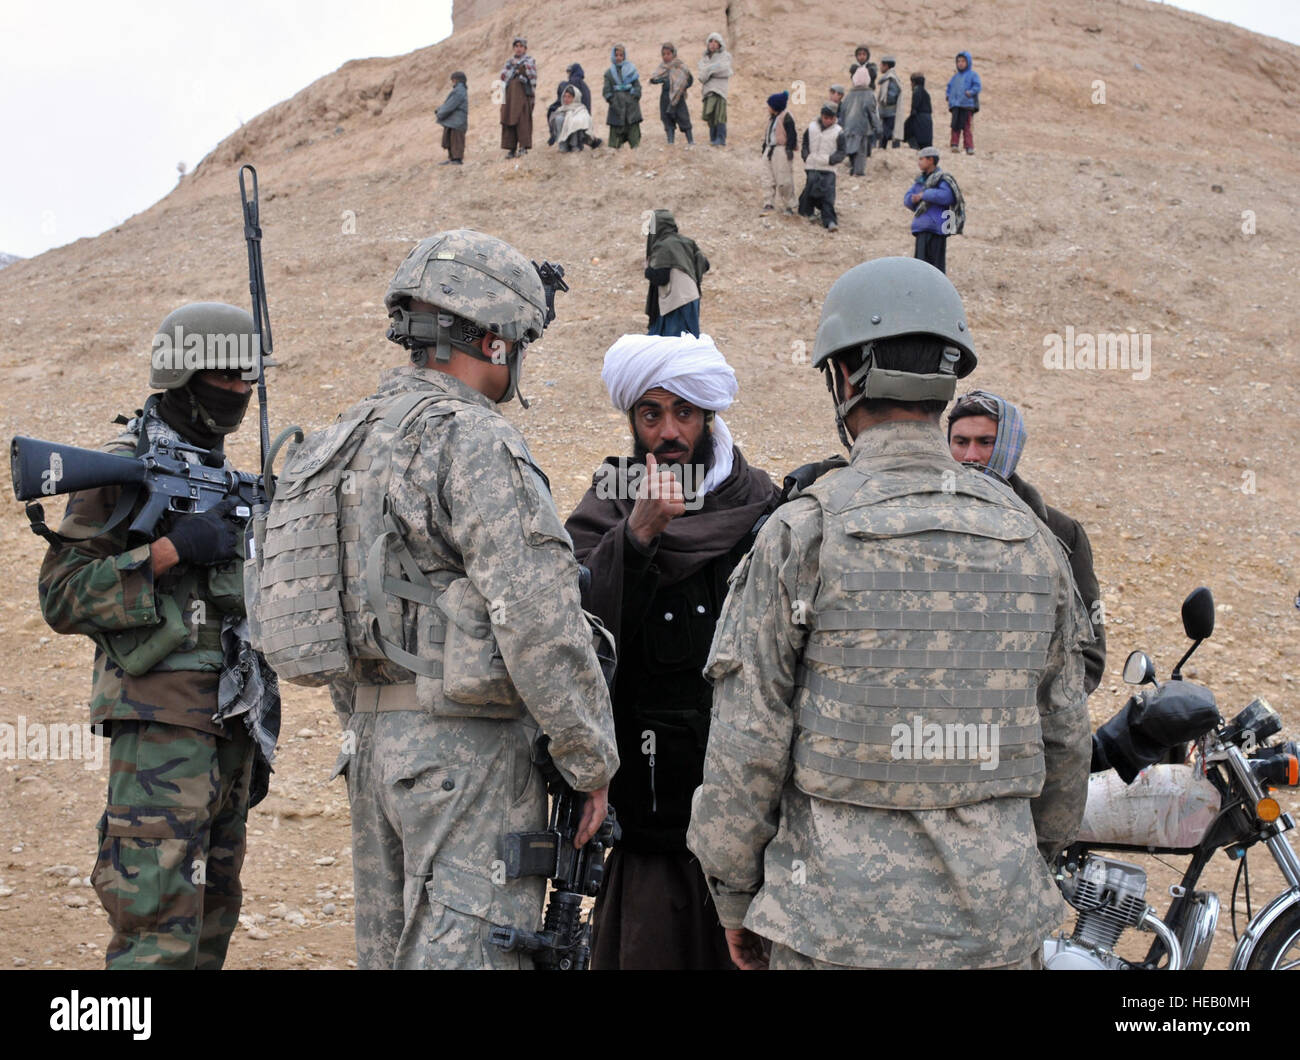 A local Afghan man from Nawbor Village, Bala Murghab district, Baghdis province, Afghanistan, talks through an interpreter (right) to (left) U.S. Army Staff Sgt. Nicholas Lewis, a scout with White Platoon, Bulldog Troop, 7th Squadron, 10th Cavalry Regiment, 1st Brigade, 4th Infantry Division, at Fort Carson, Colo., Jan. 16, 2011. The Afghan thanked the Afghan National Army and U.S. Army scouts for ridding his village of insurgents and bringing a better life to the Nawbor children, who gathered on the hill. Stock Photo